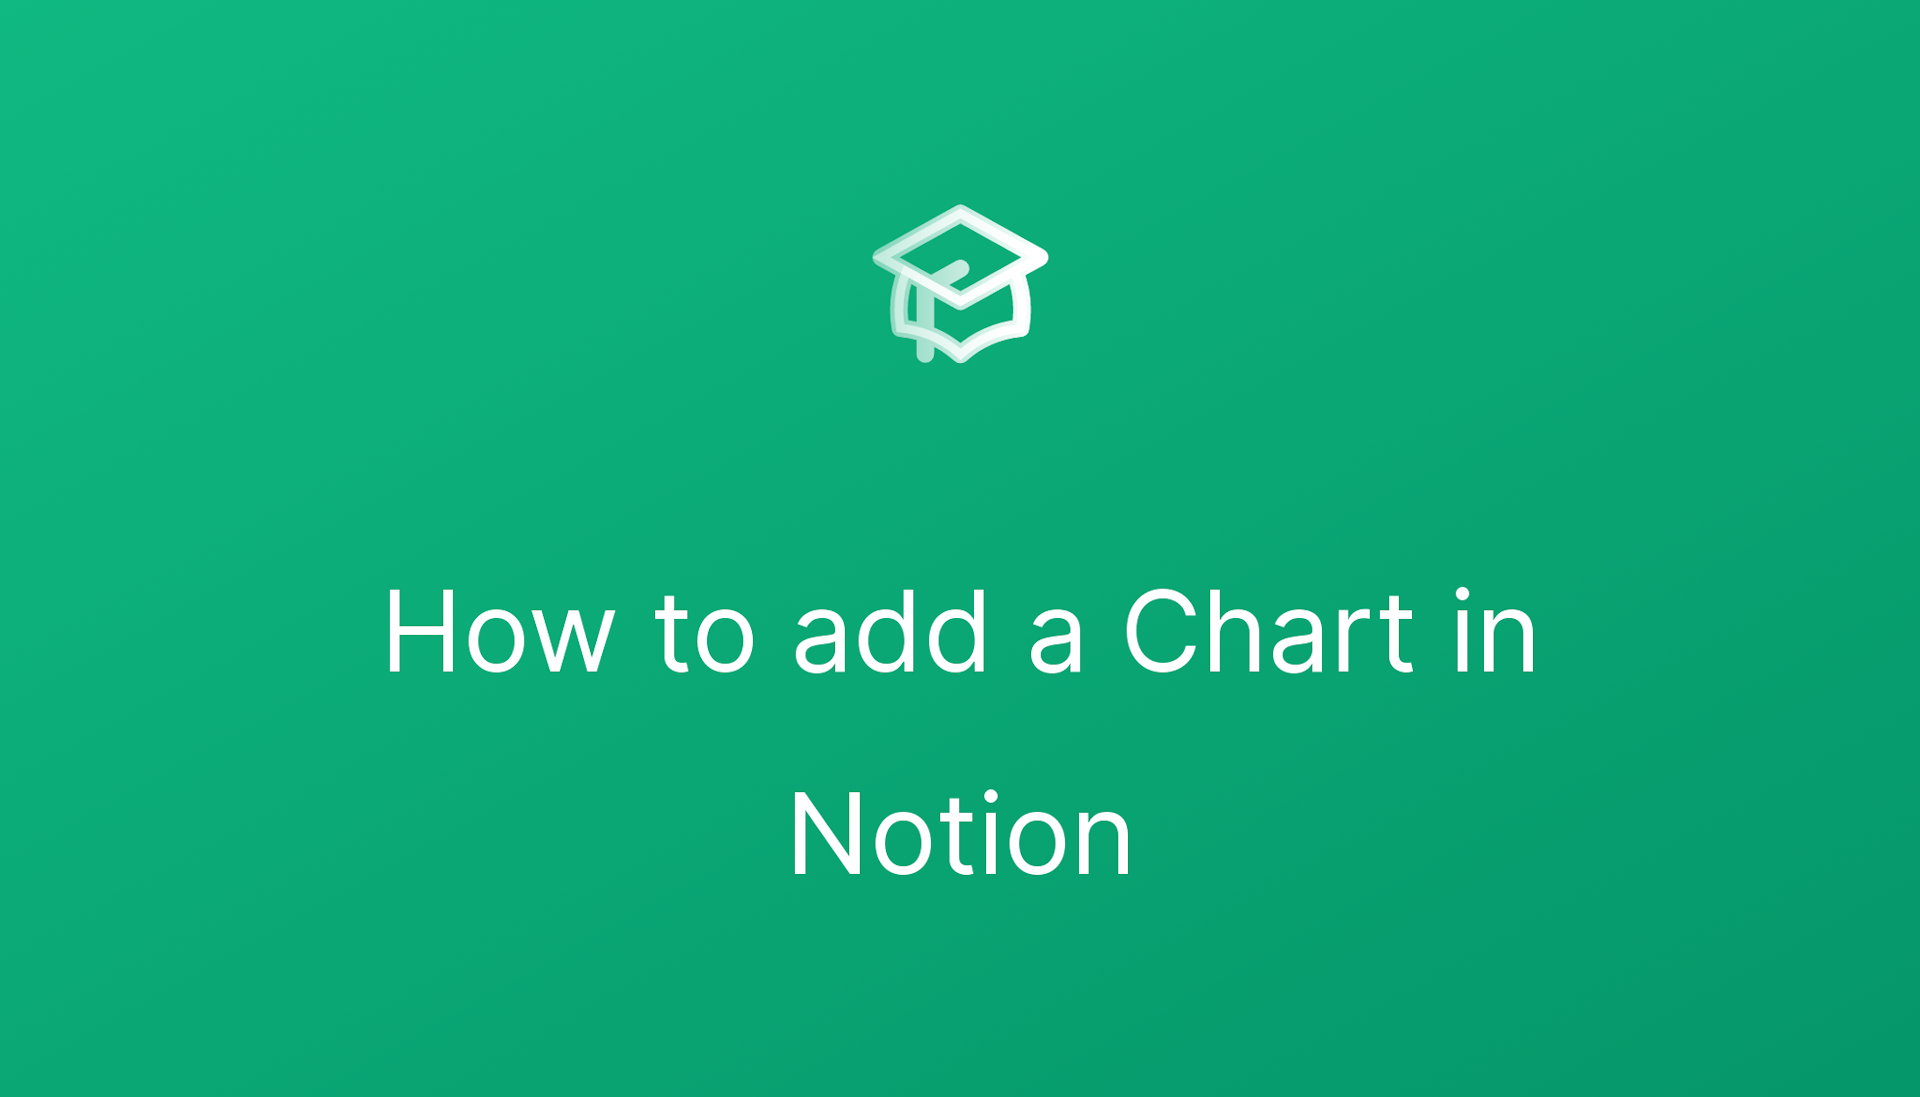 How to add a Chart in Notion